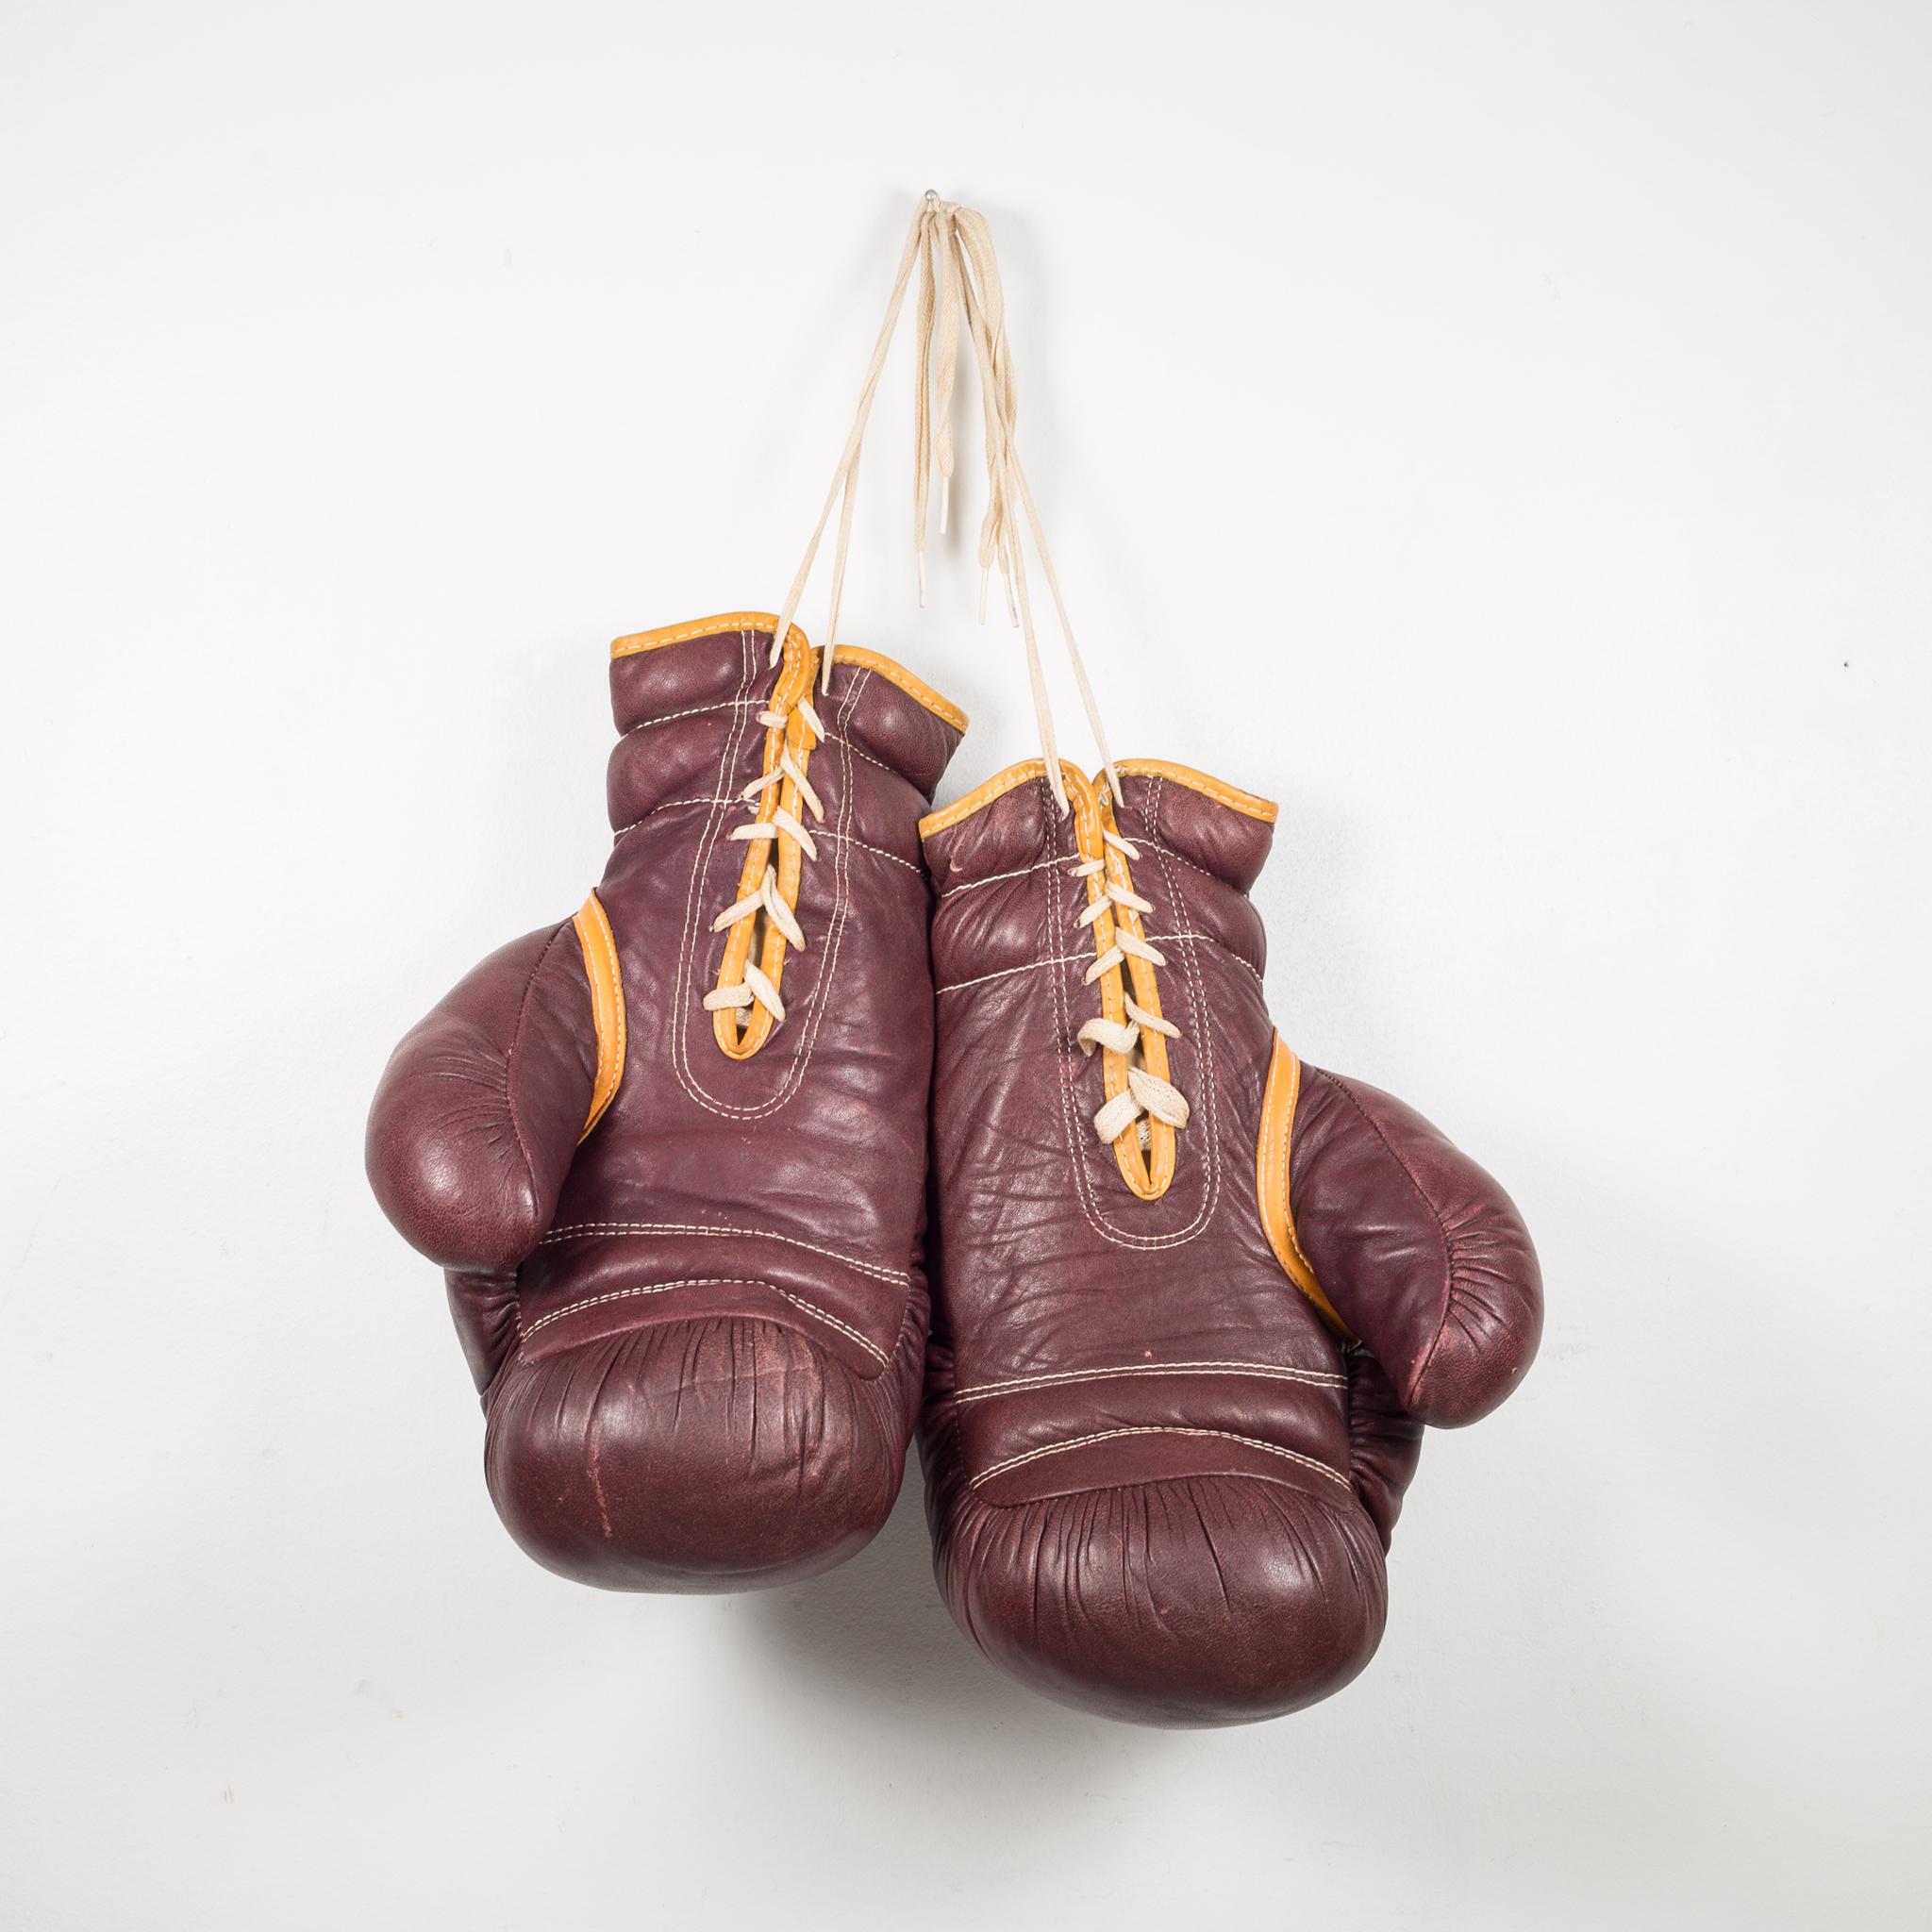 About

A pair of large vintage leather boxing gloves. The boxing gloves are soft brown leather with gold leather piping, yellow laces and 